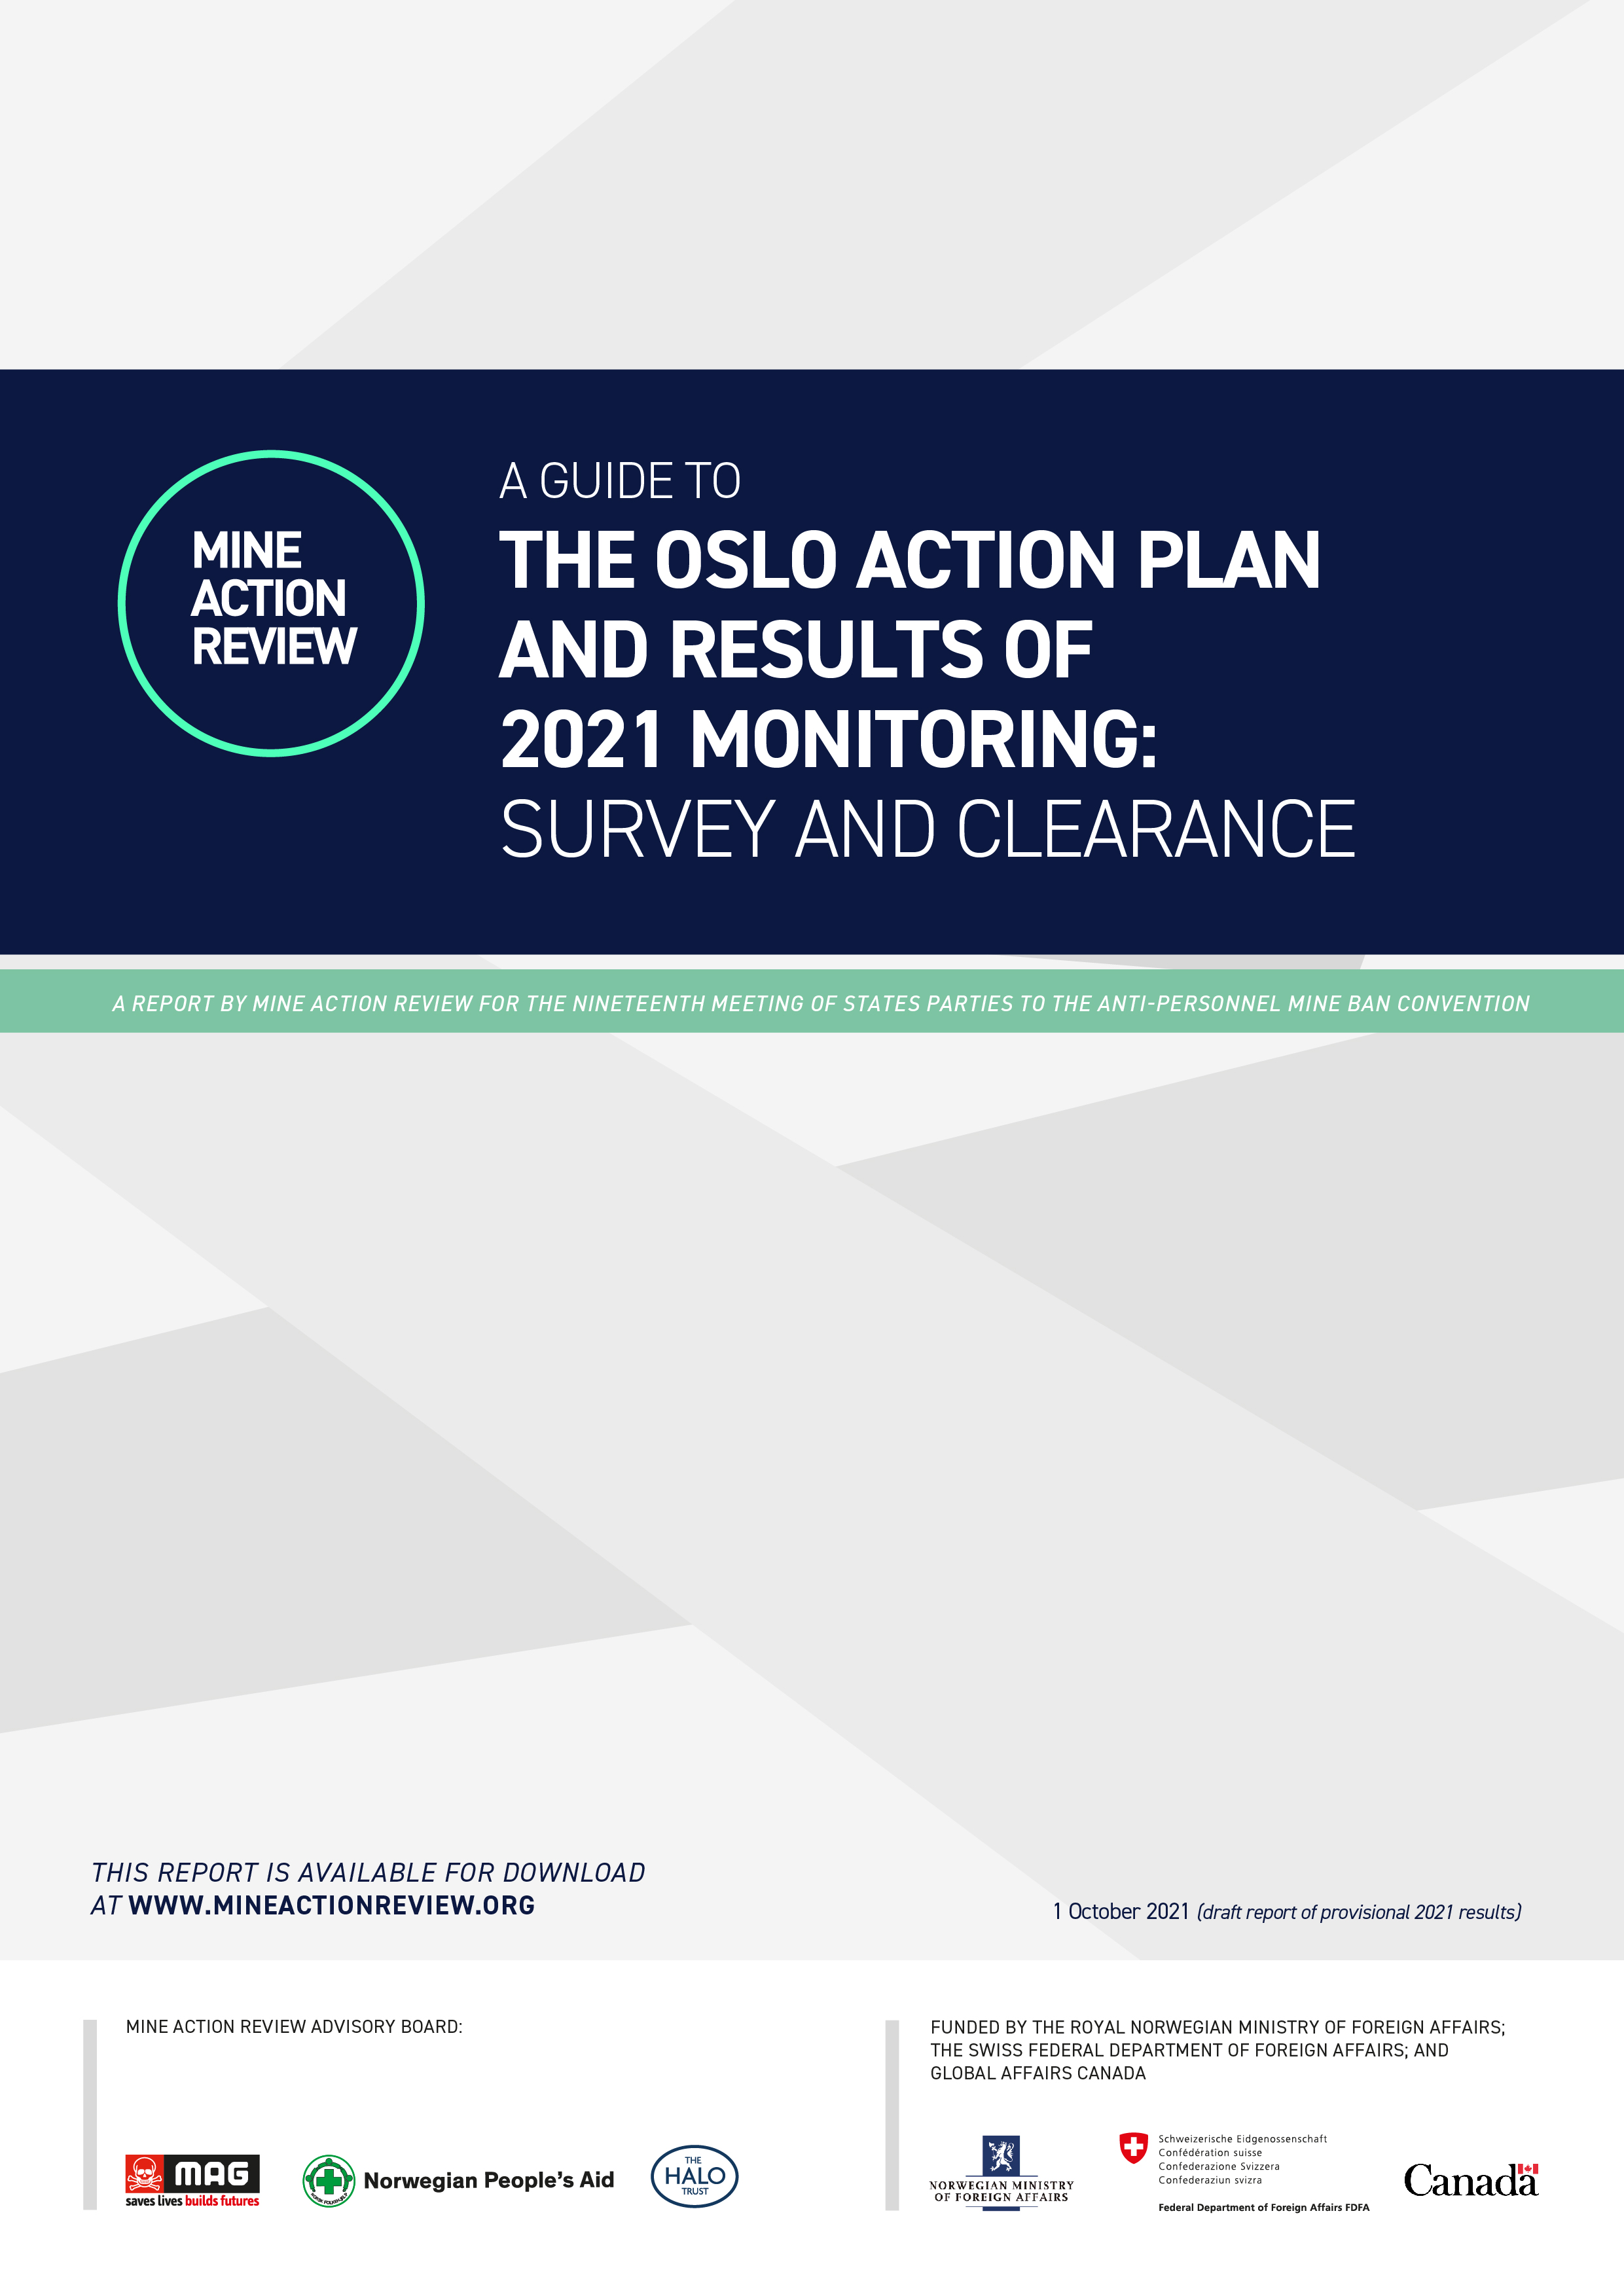 Guide to the Oslo Action Plan and Provisional Results of 2021 Monitoring